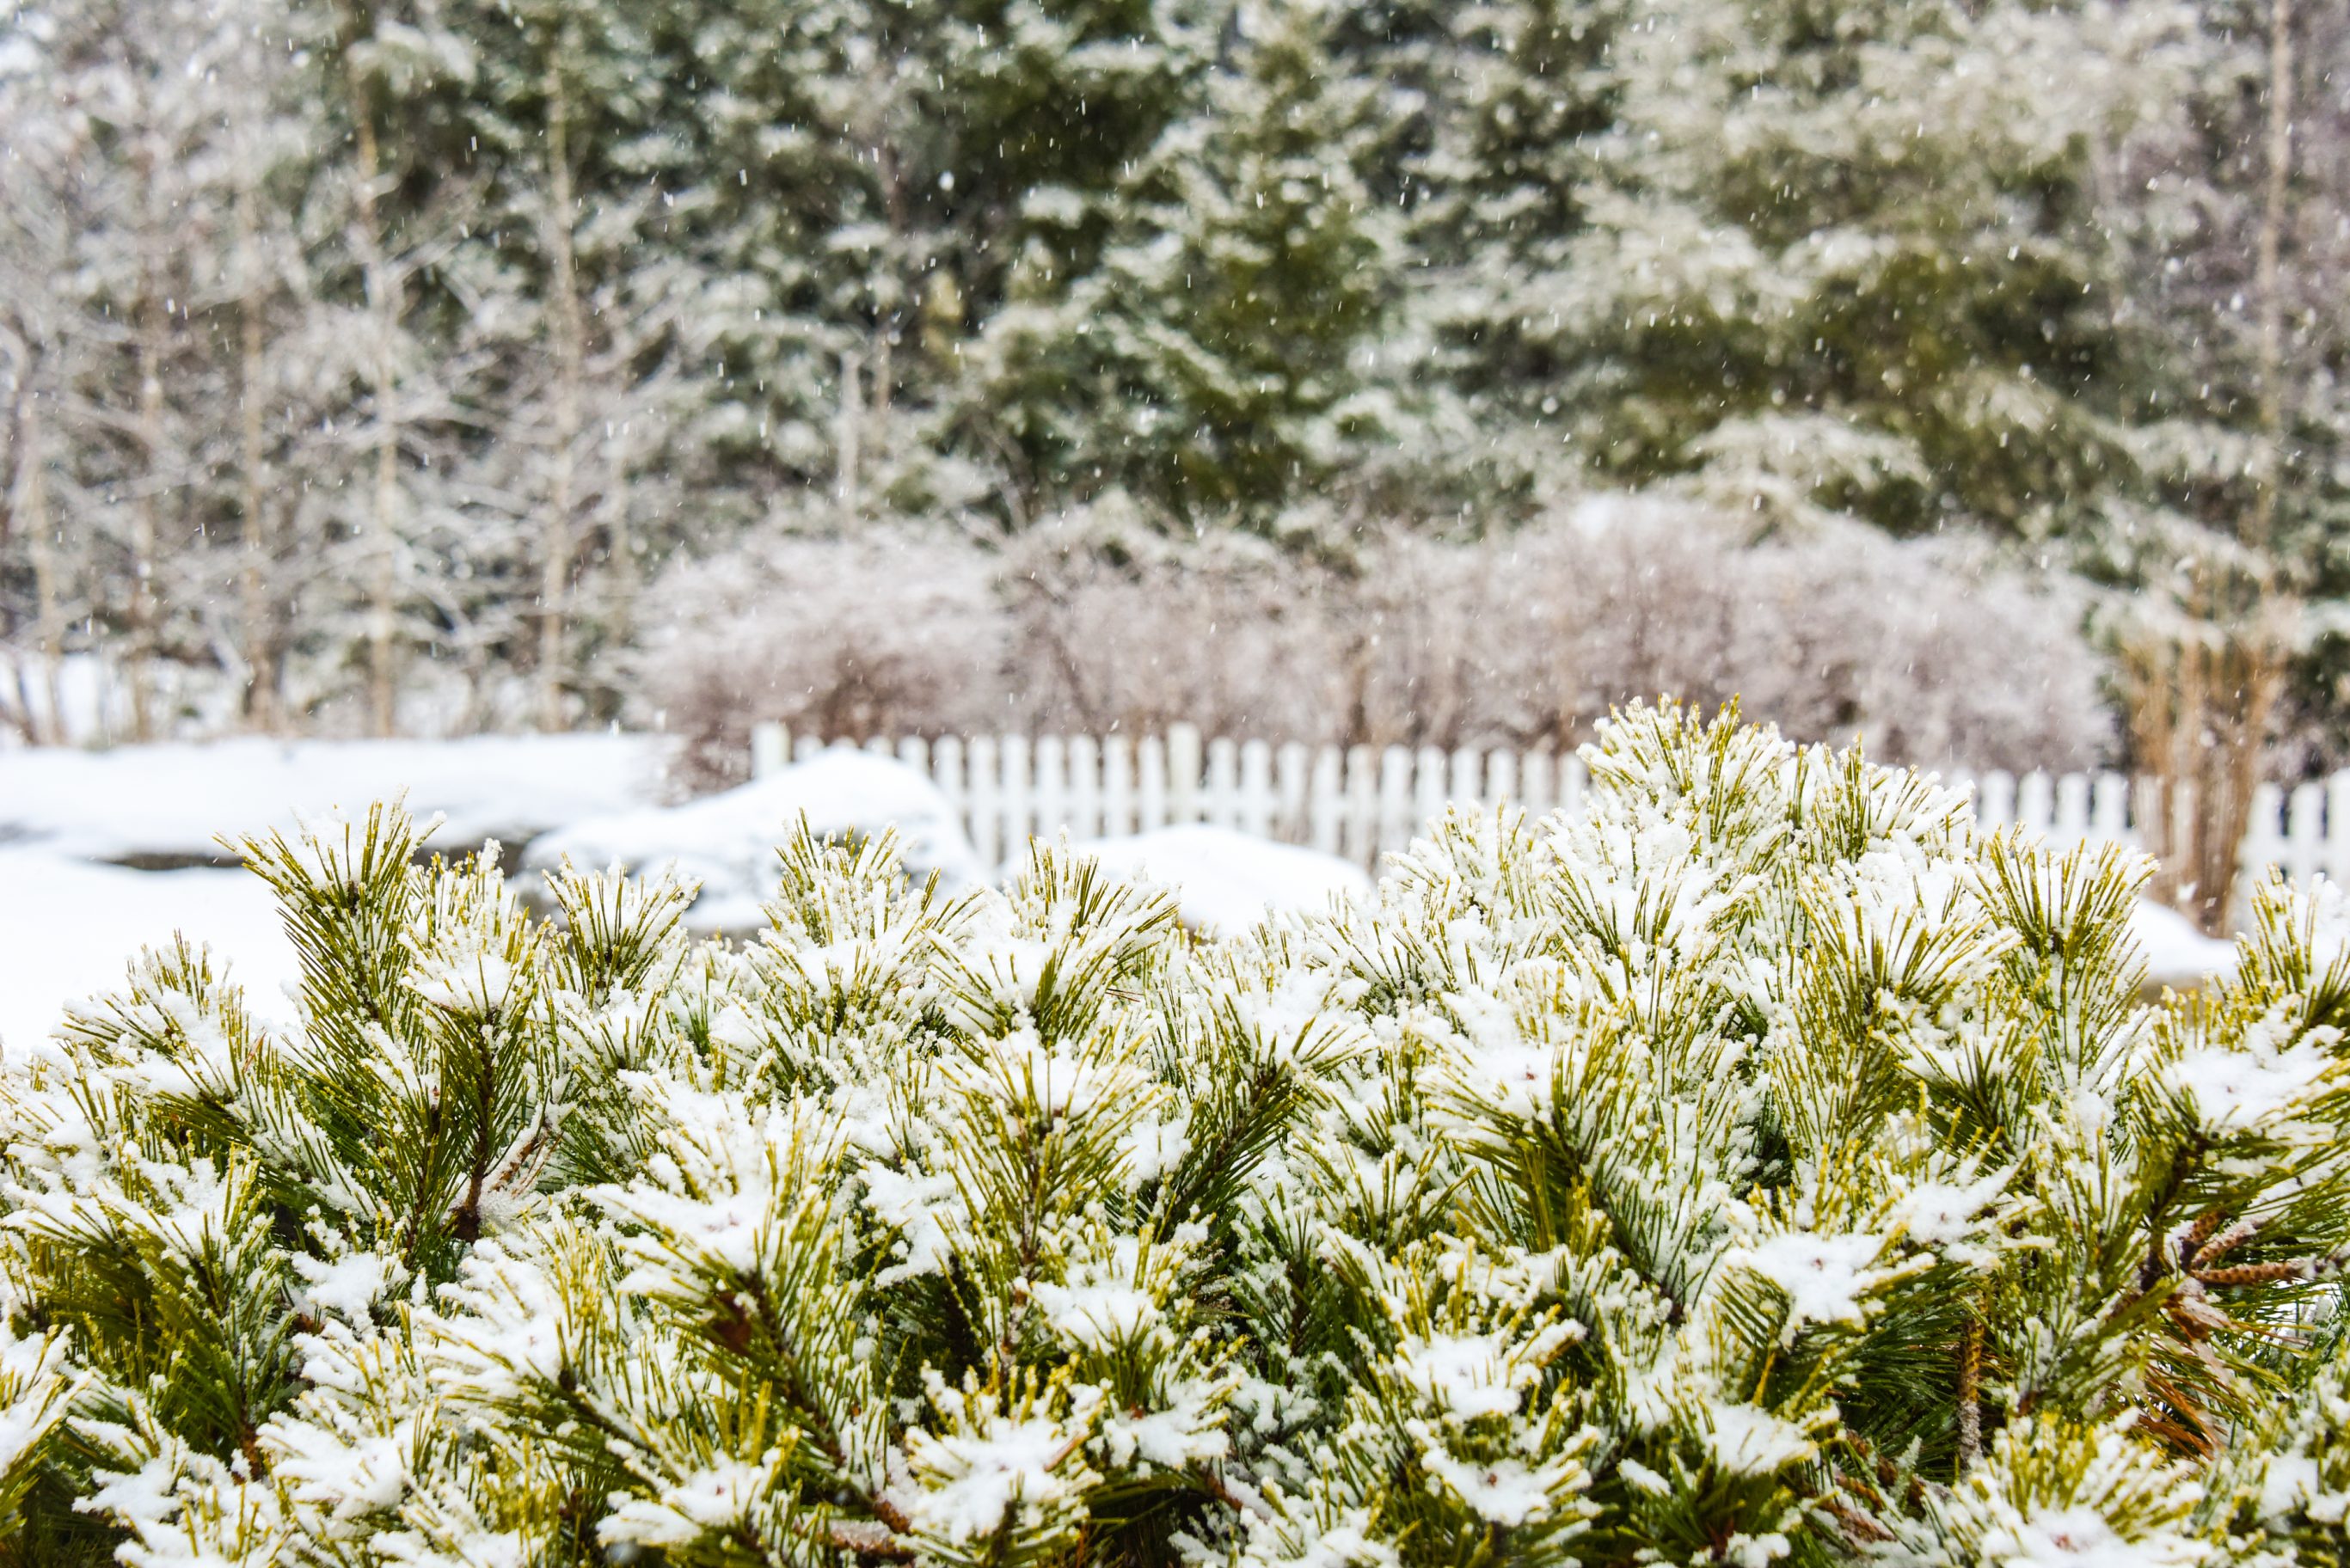 Snow-covered green plant in a garden setting.